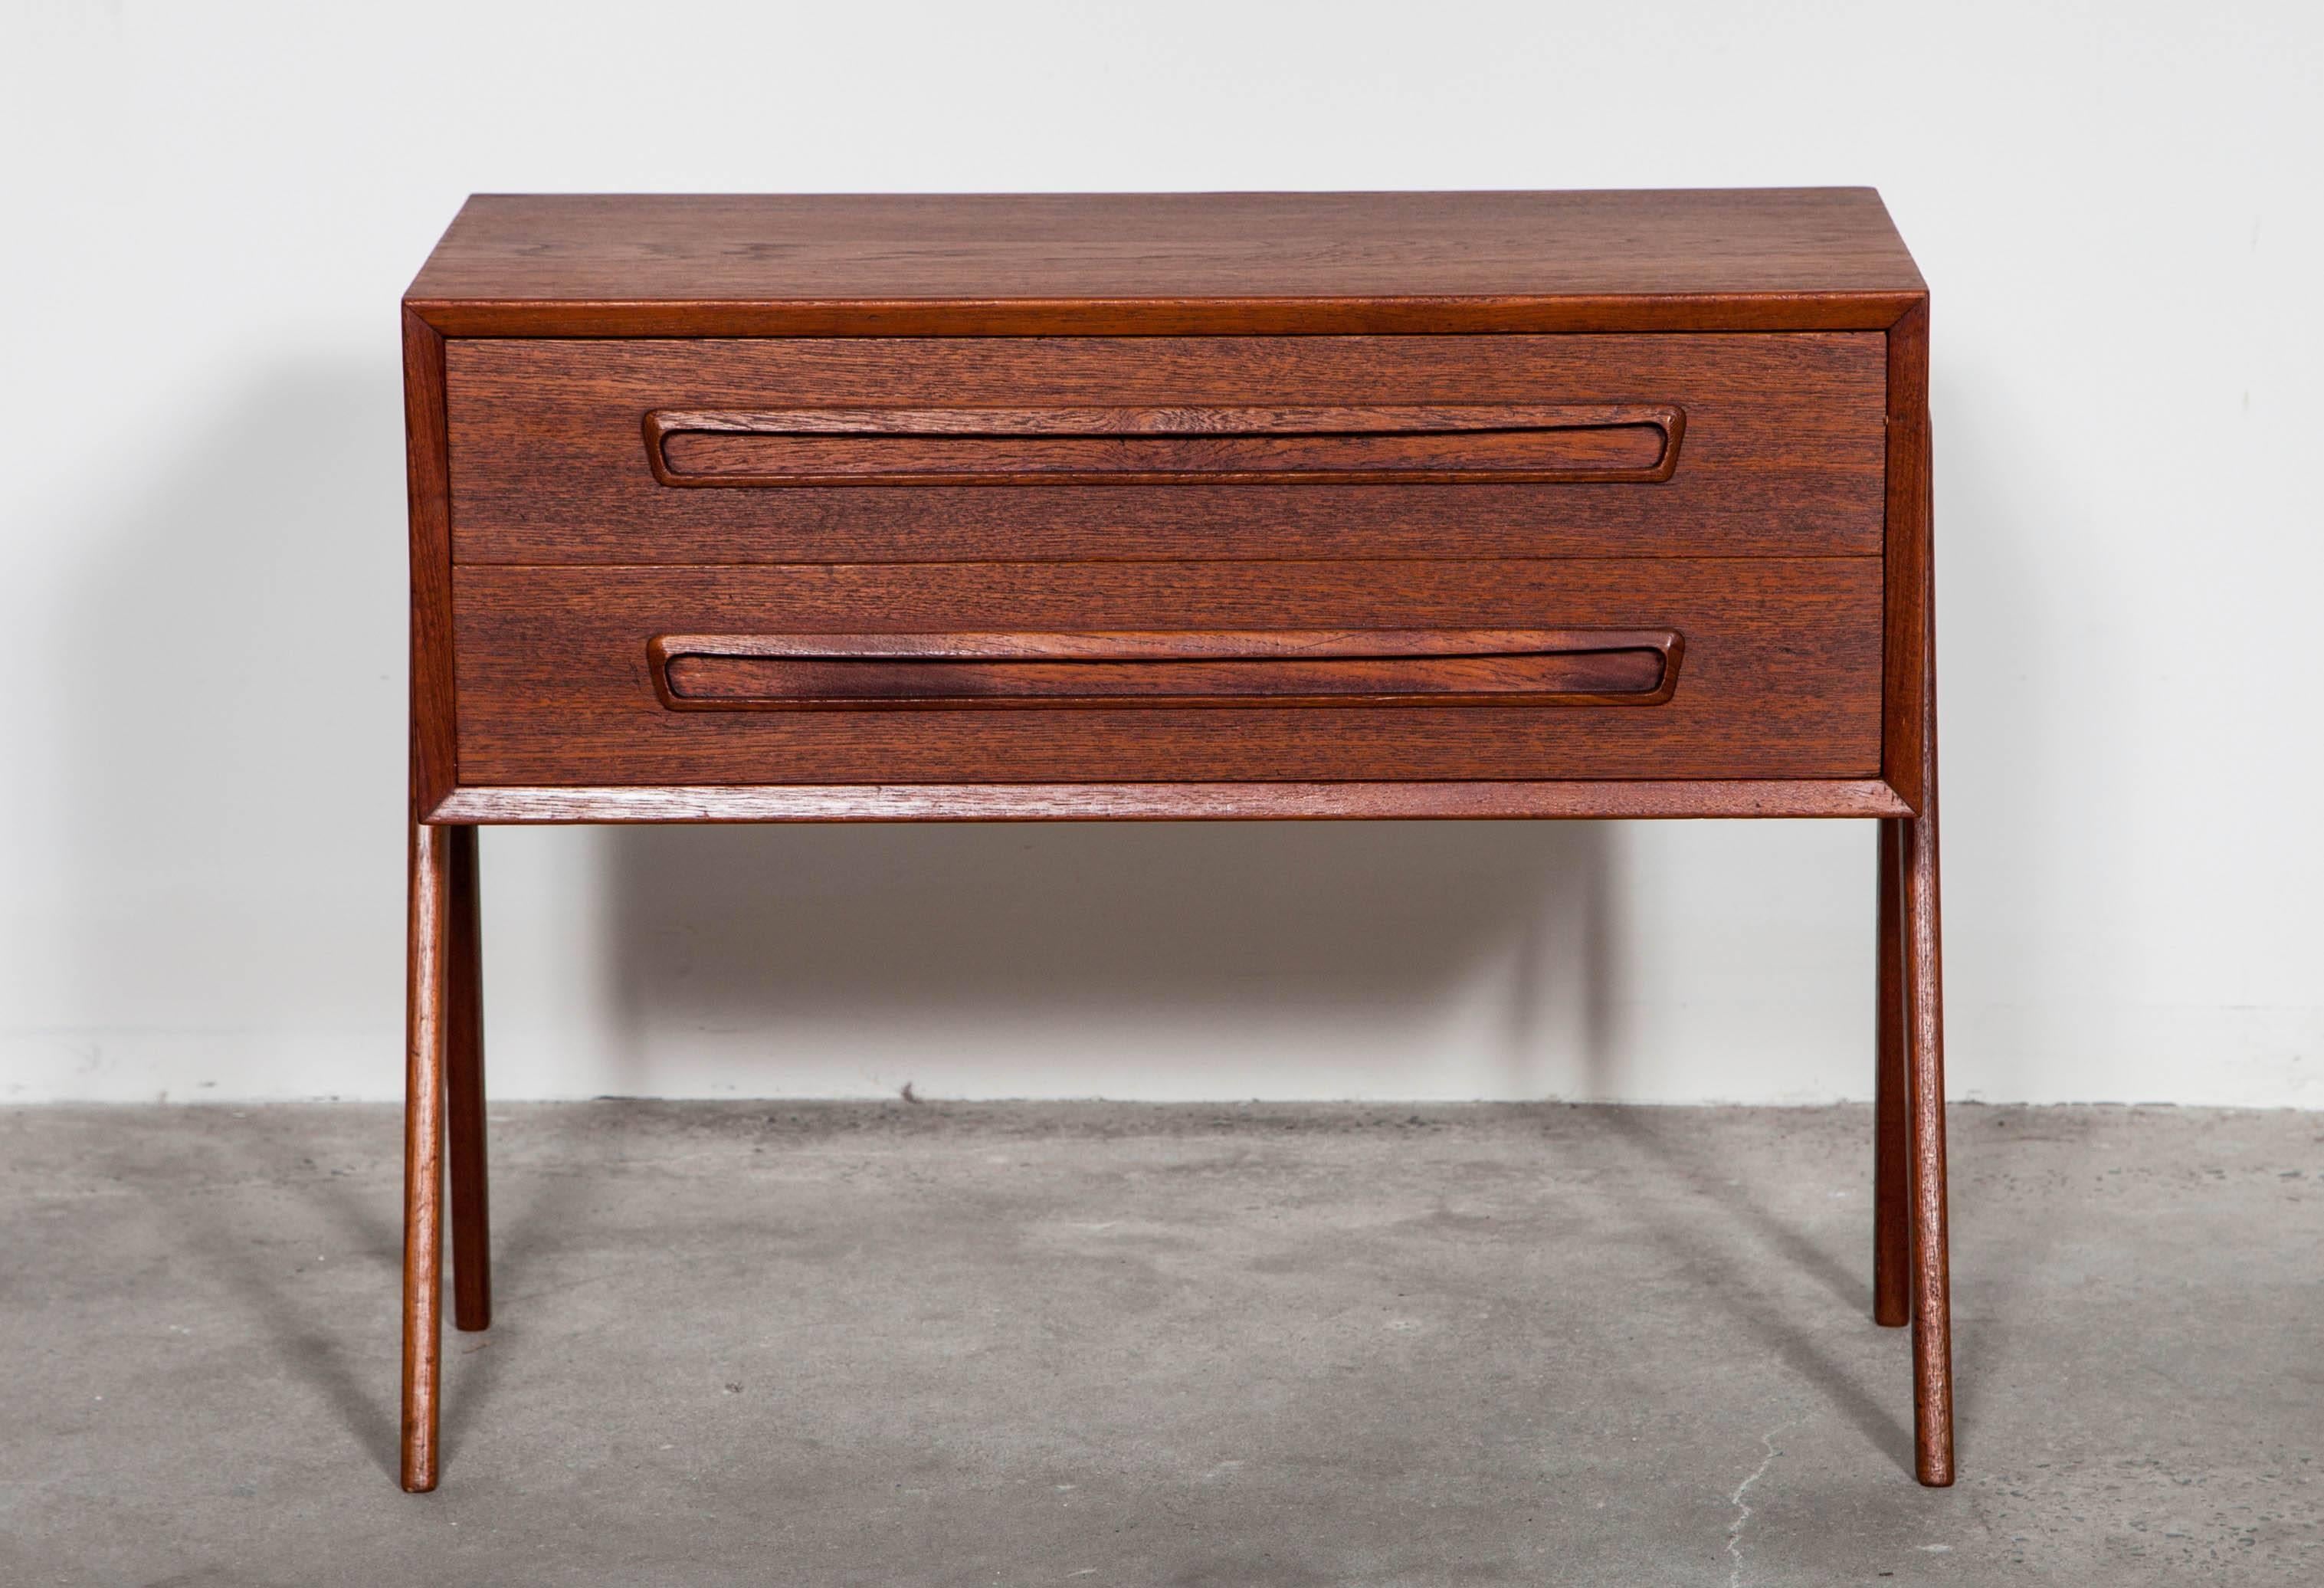 Vintage 1960s Teak Bedside Table

This Danish bedside table goes harmoniously in many different decor environments. Can also be used around the house for extra storage. Ready for pick up, delivery, or shipping.